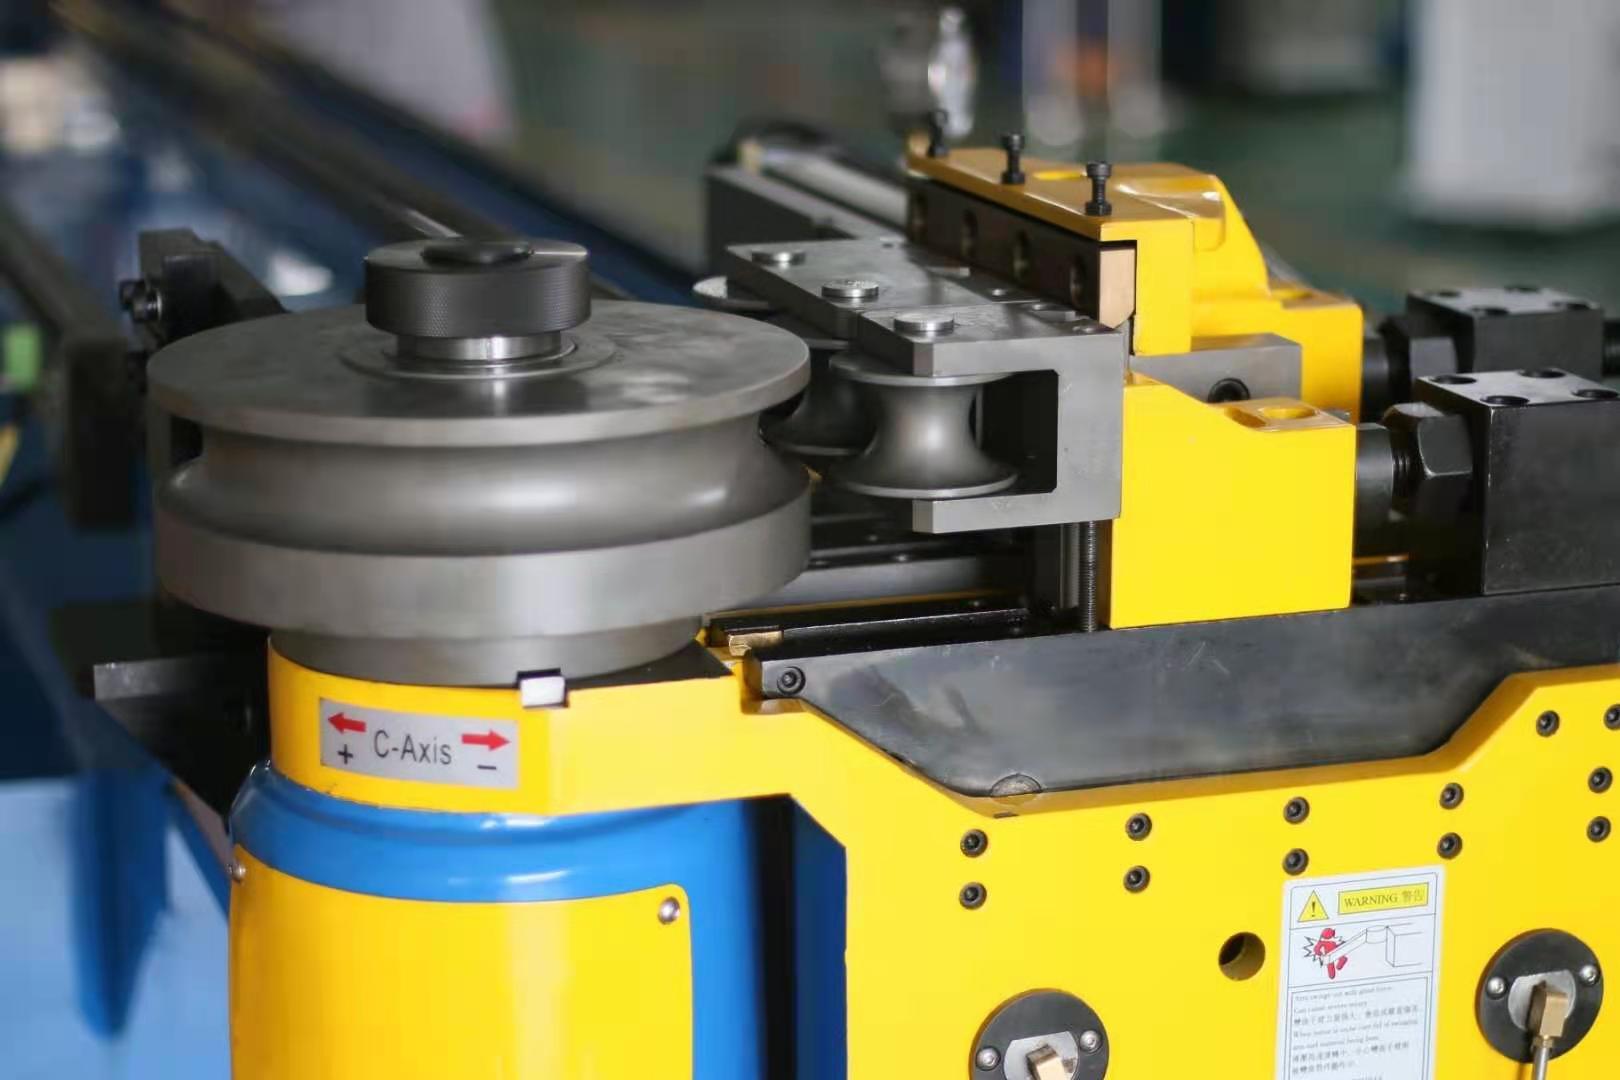 What safety matters should be paid attention to when bending a single head hydraulic pipe bending machine?